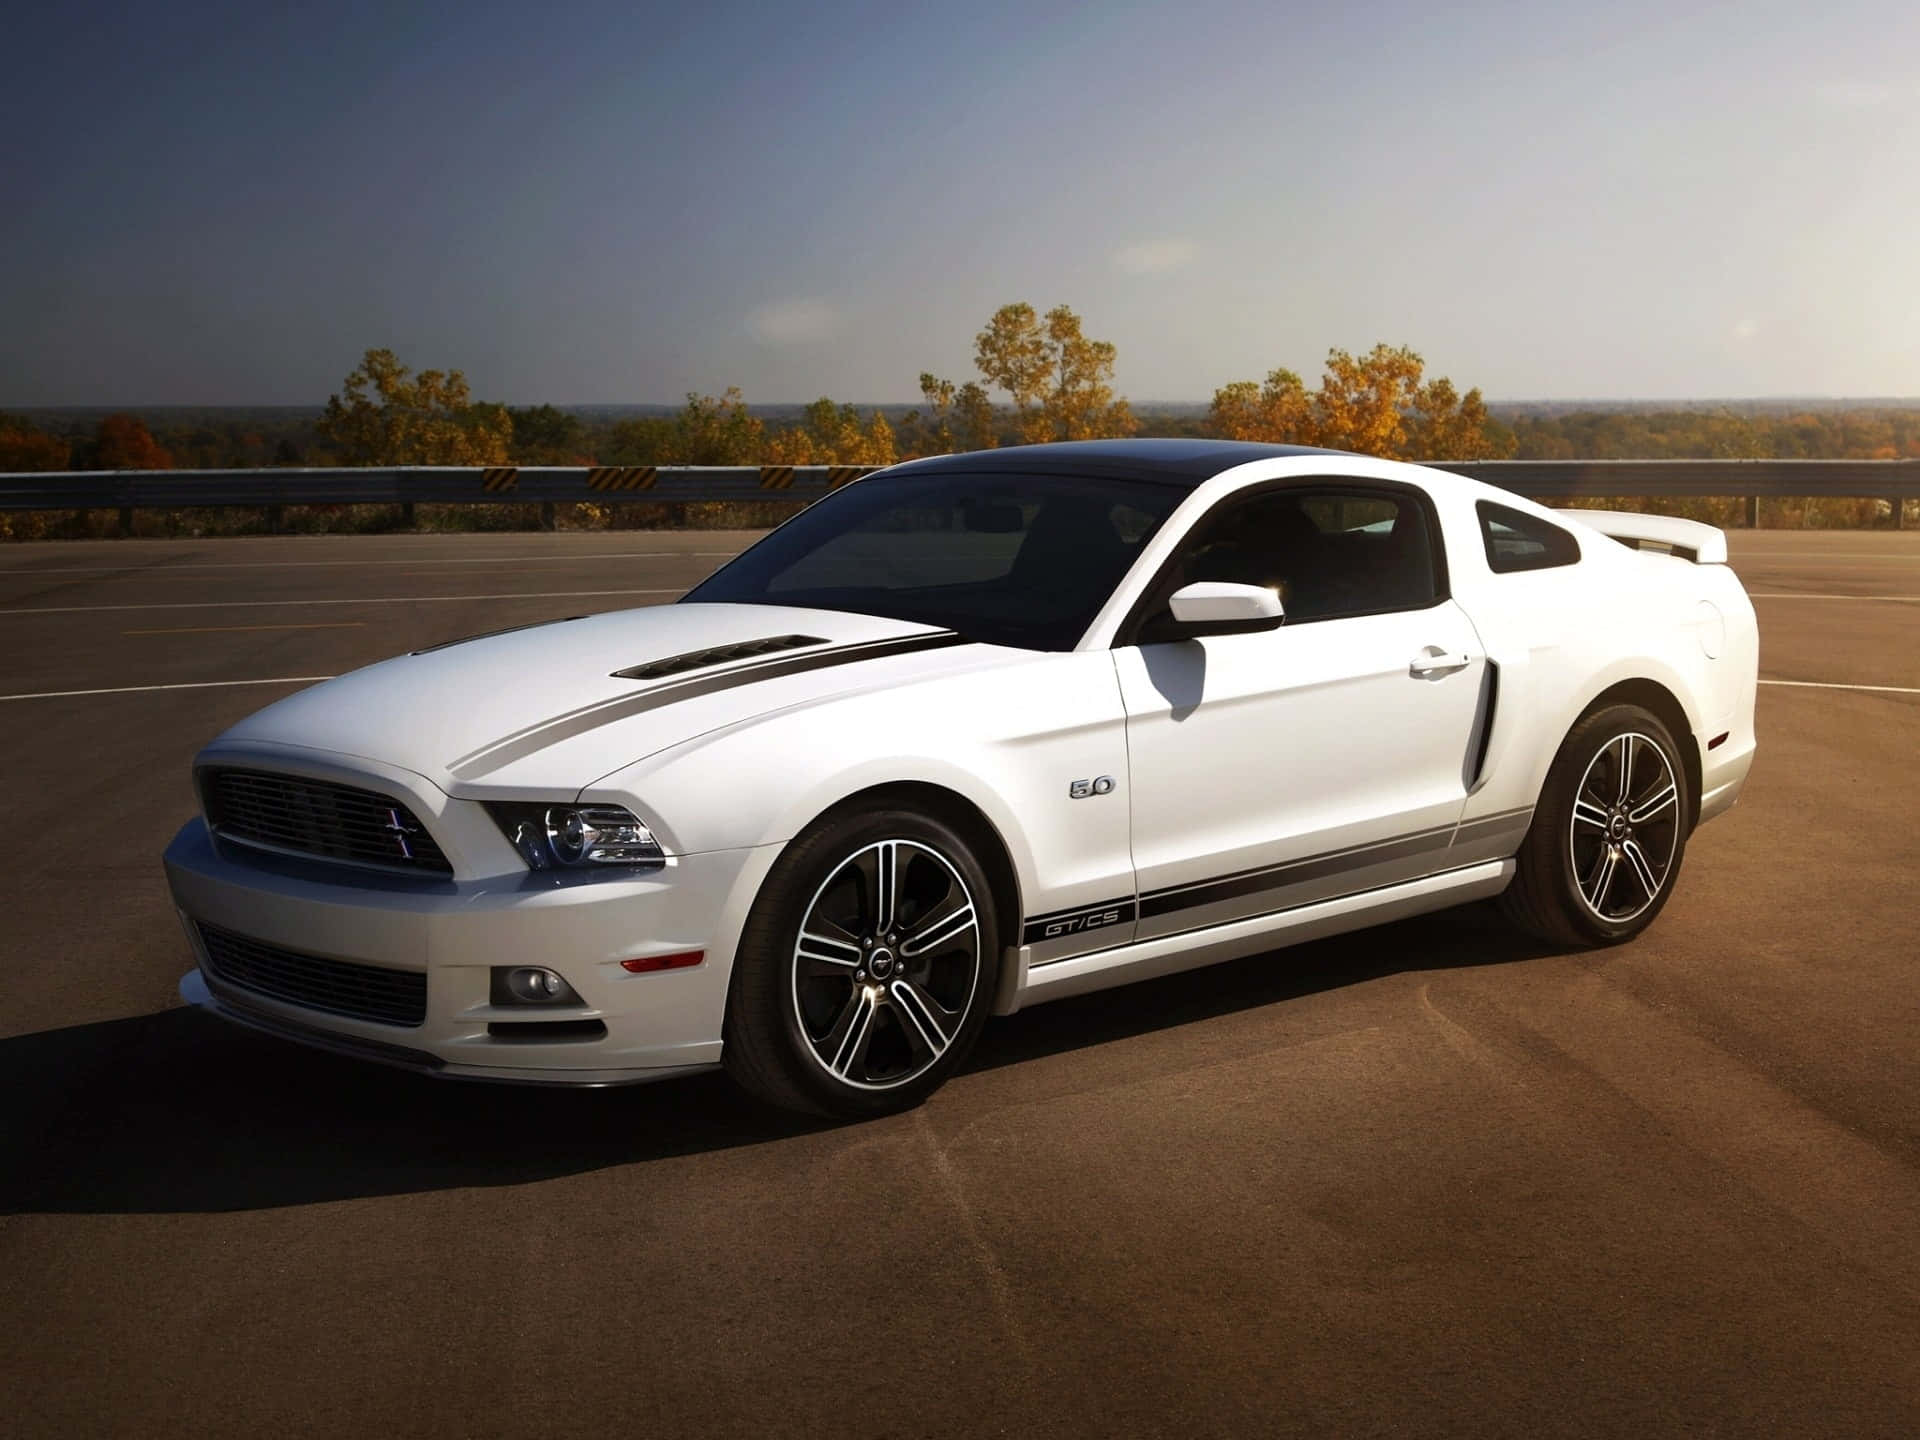 Sleek Ford Mustang California Special cruising on the open road. Wallpaper